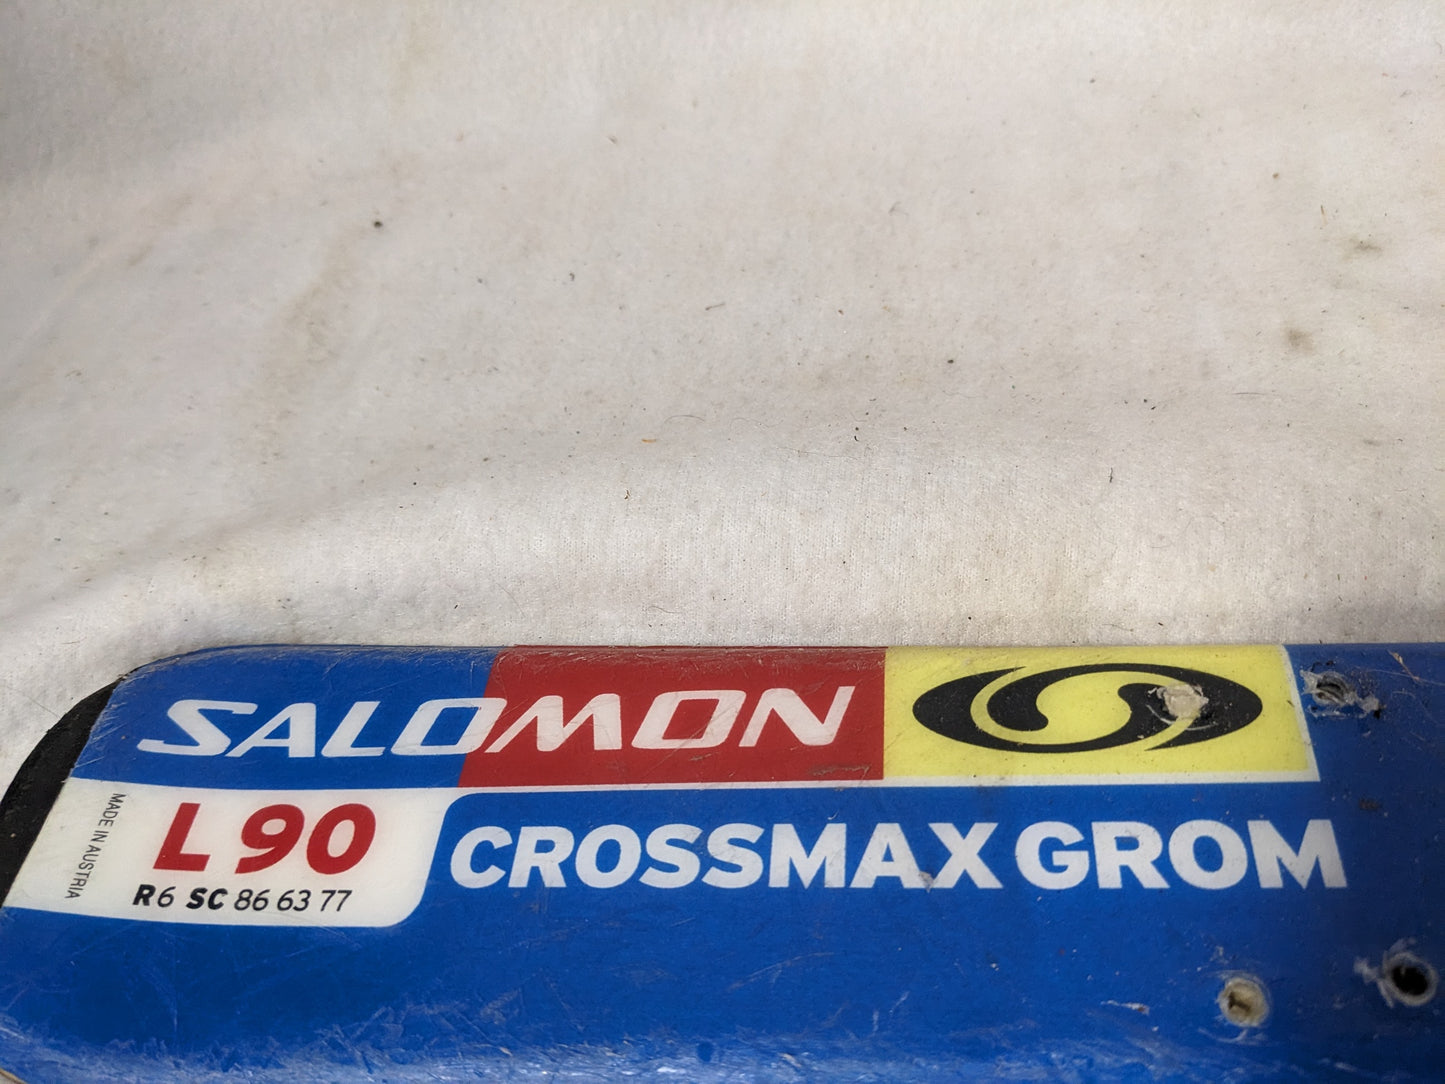 Salomon Crossmax Grom Skis *NO Bindings* Size 90 Cm Color Blue Condition Used